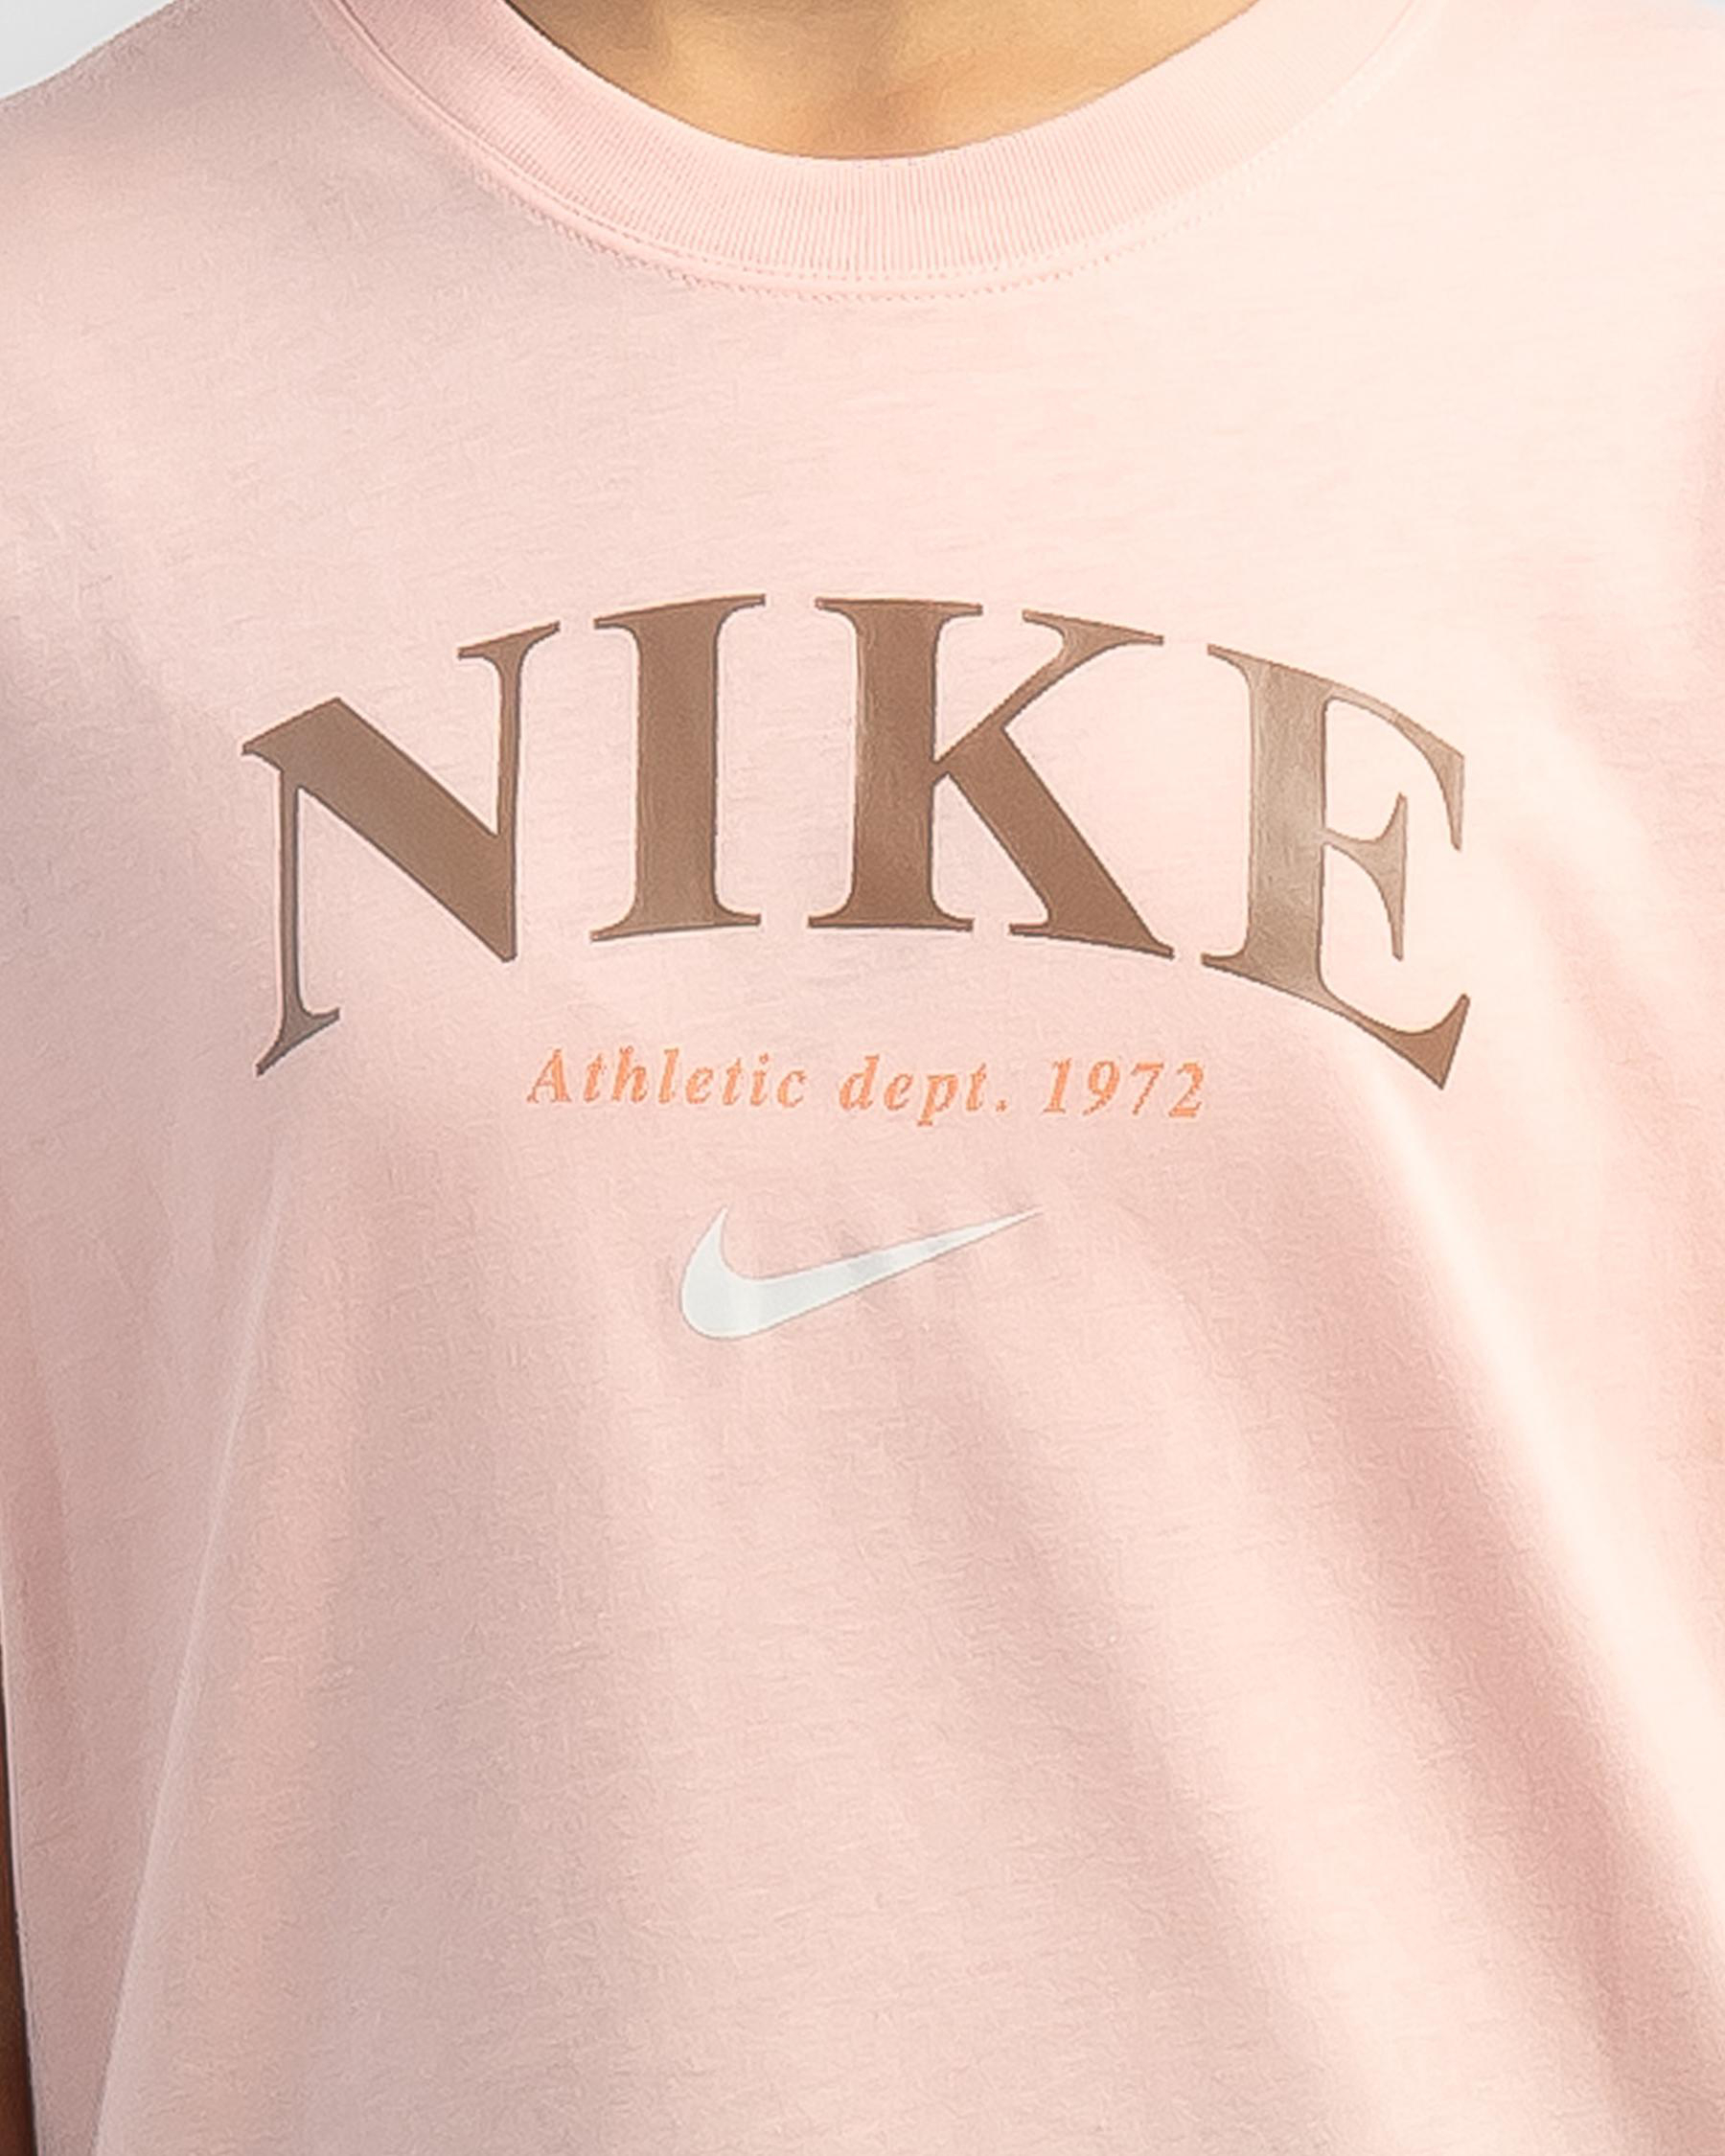 Nike Girls' Trend BF T-Shirt In Arctic Orange - Fast Shipping & Easy ...